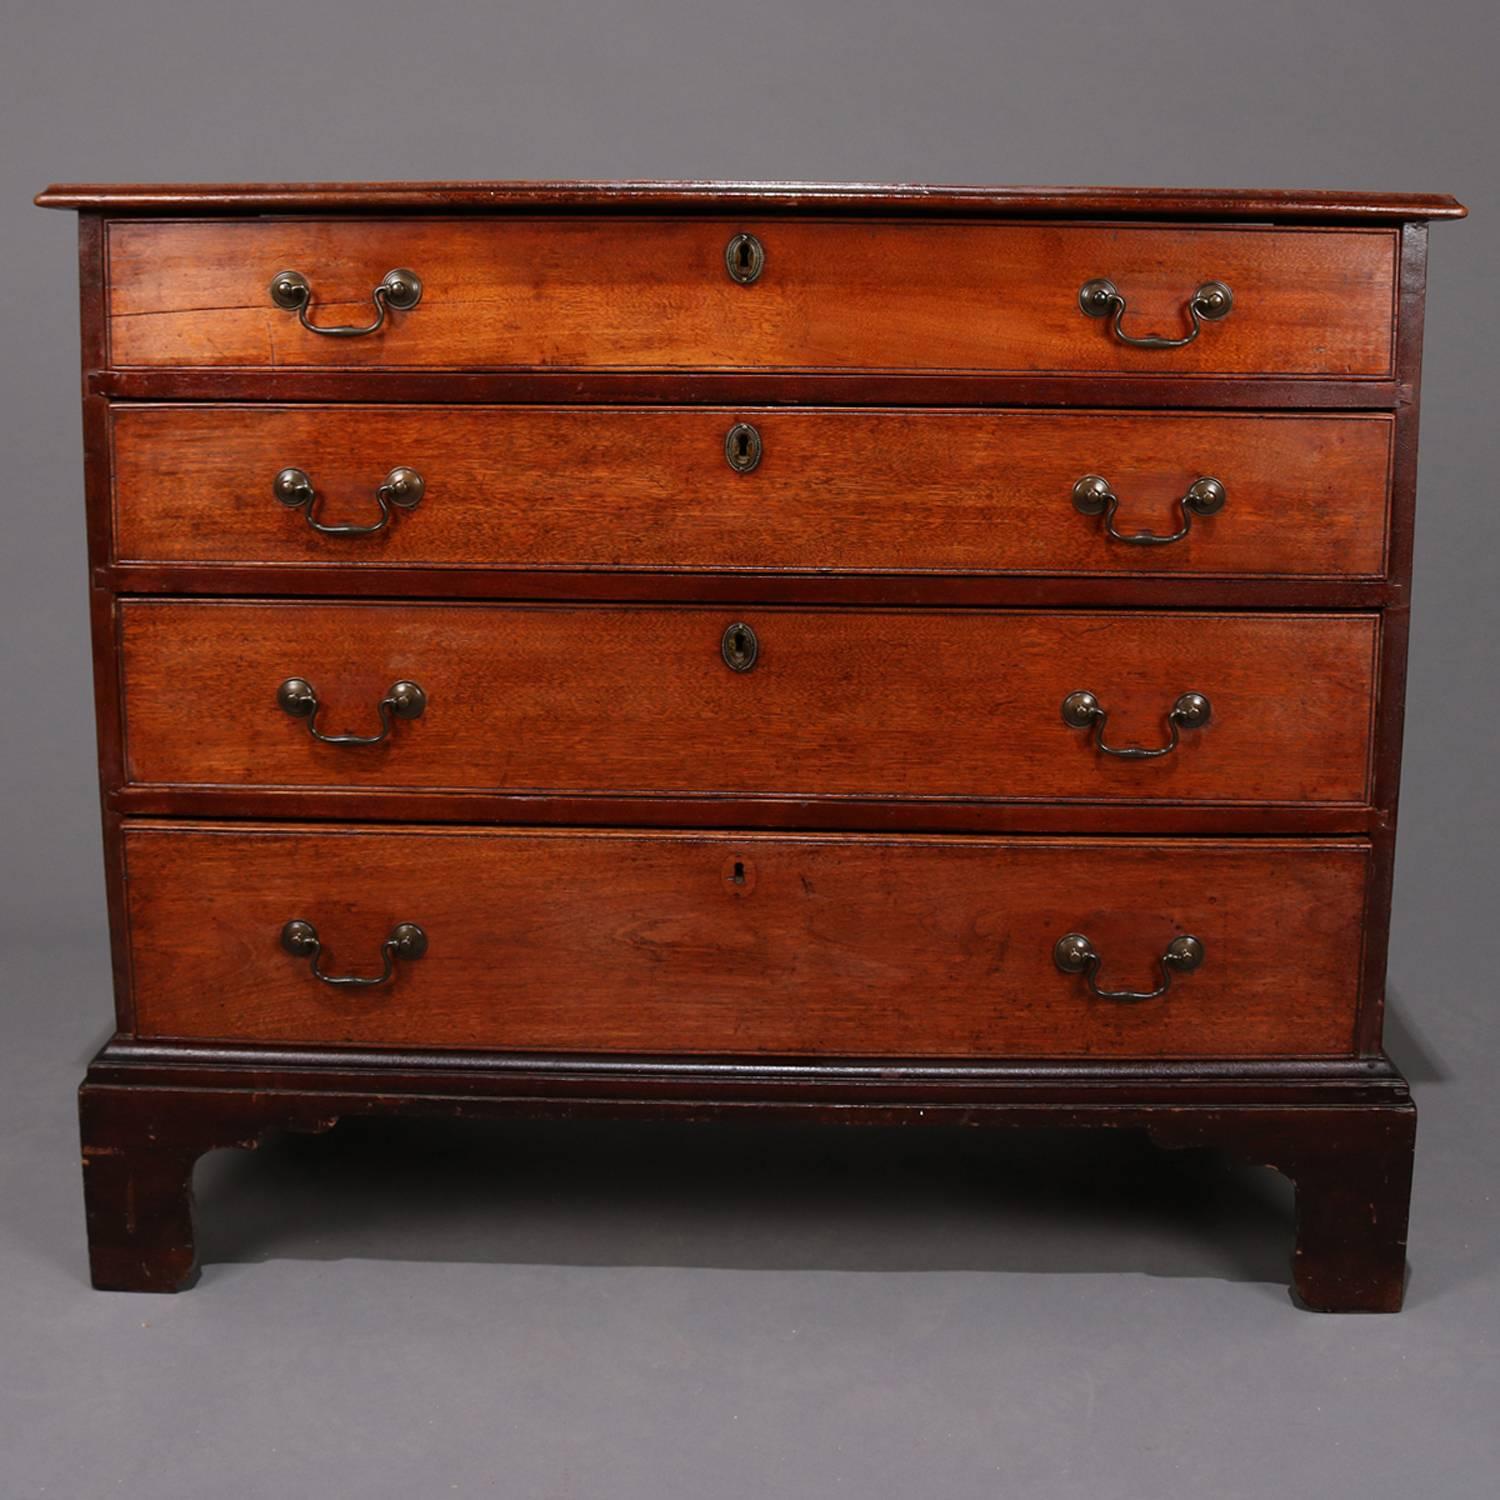 Antique and early English walnut Chippendale chest features case with four long drawers seated on dovetailed bracket feet, bronze pulls and escutcheons, 18th century.

Measures: 33.75